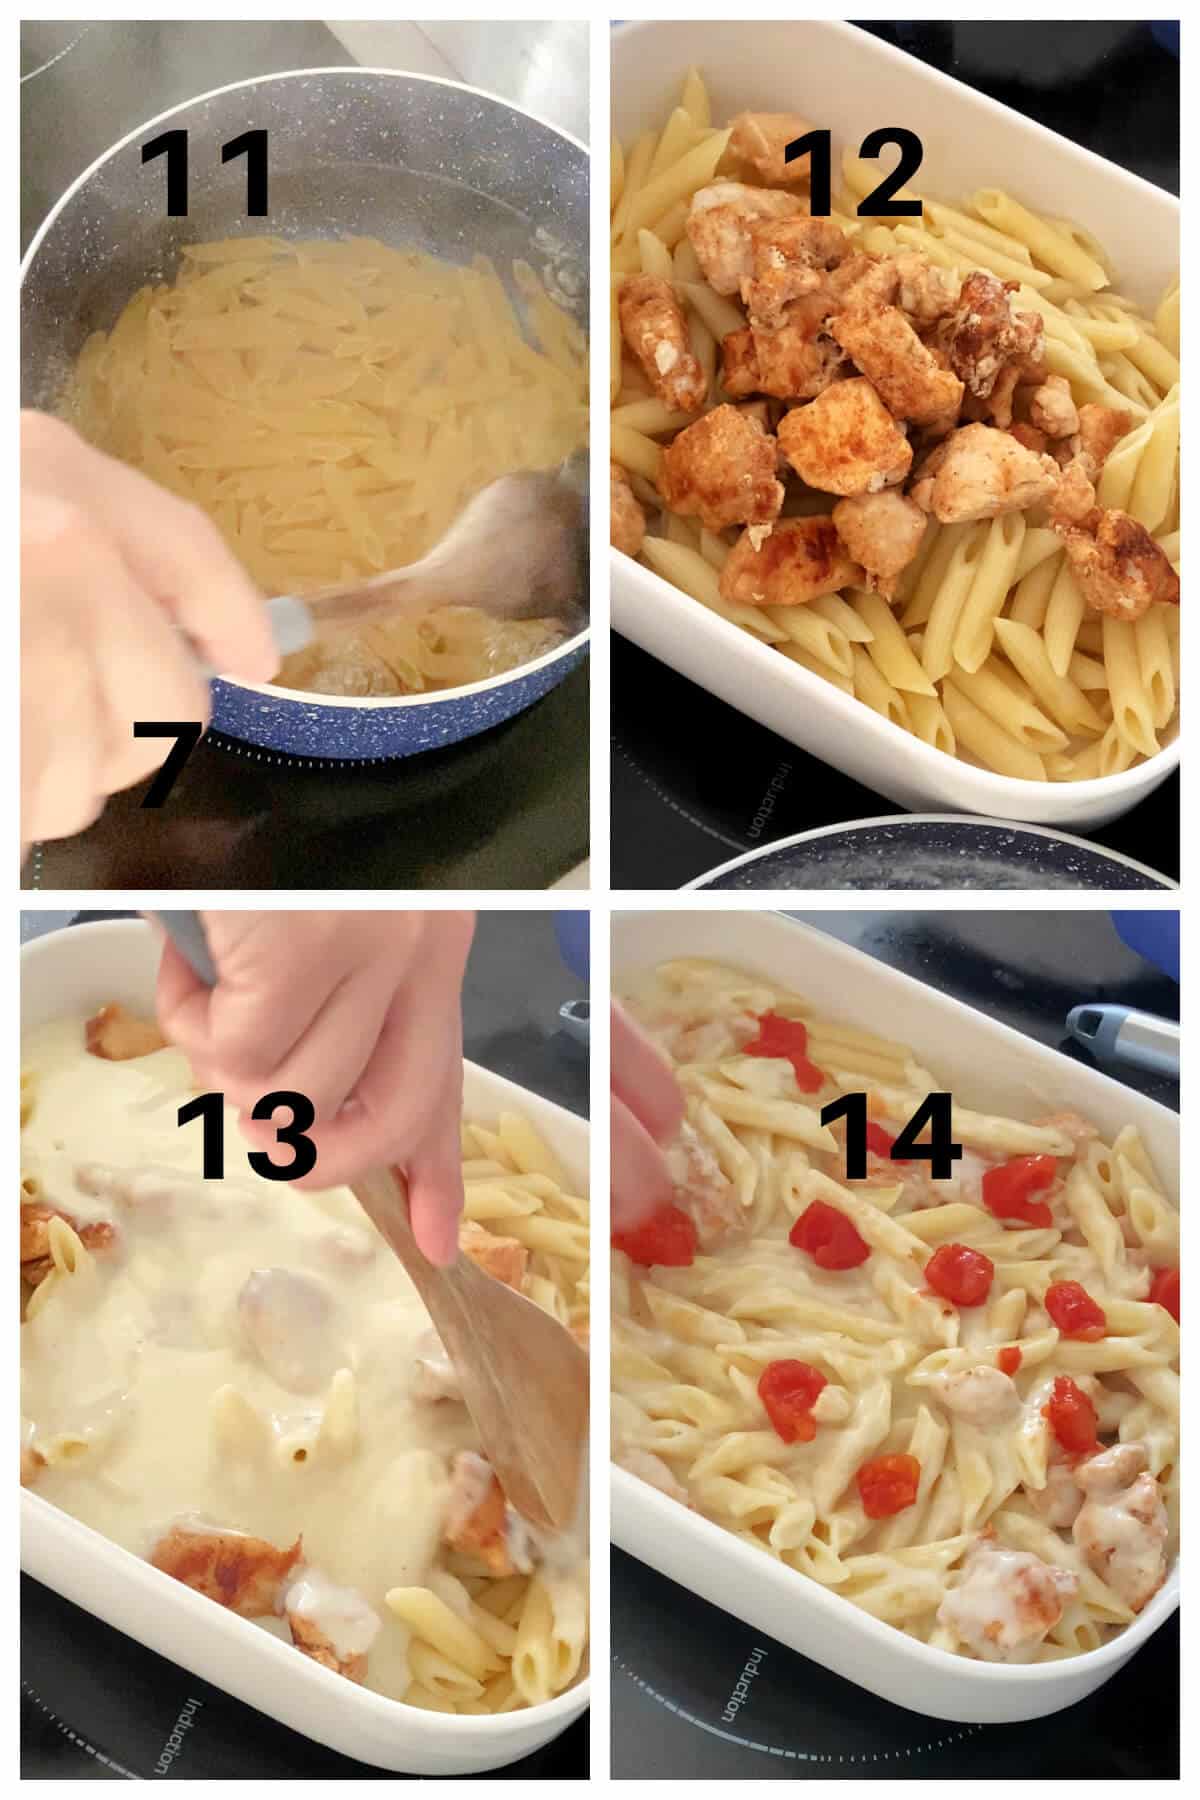 Collage of 4 photos to show how to put together the chicken pasta bake.